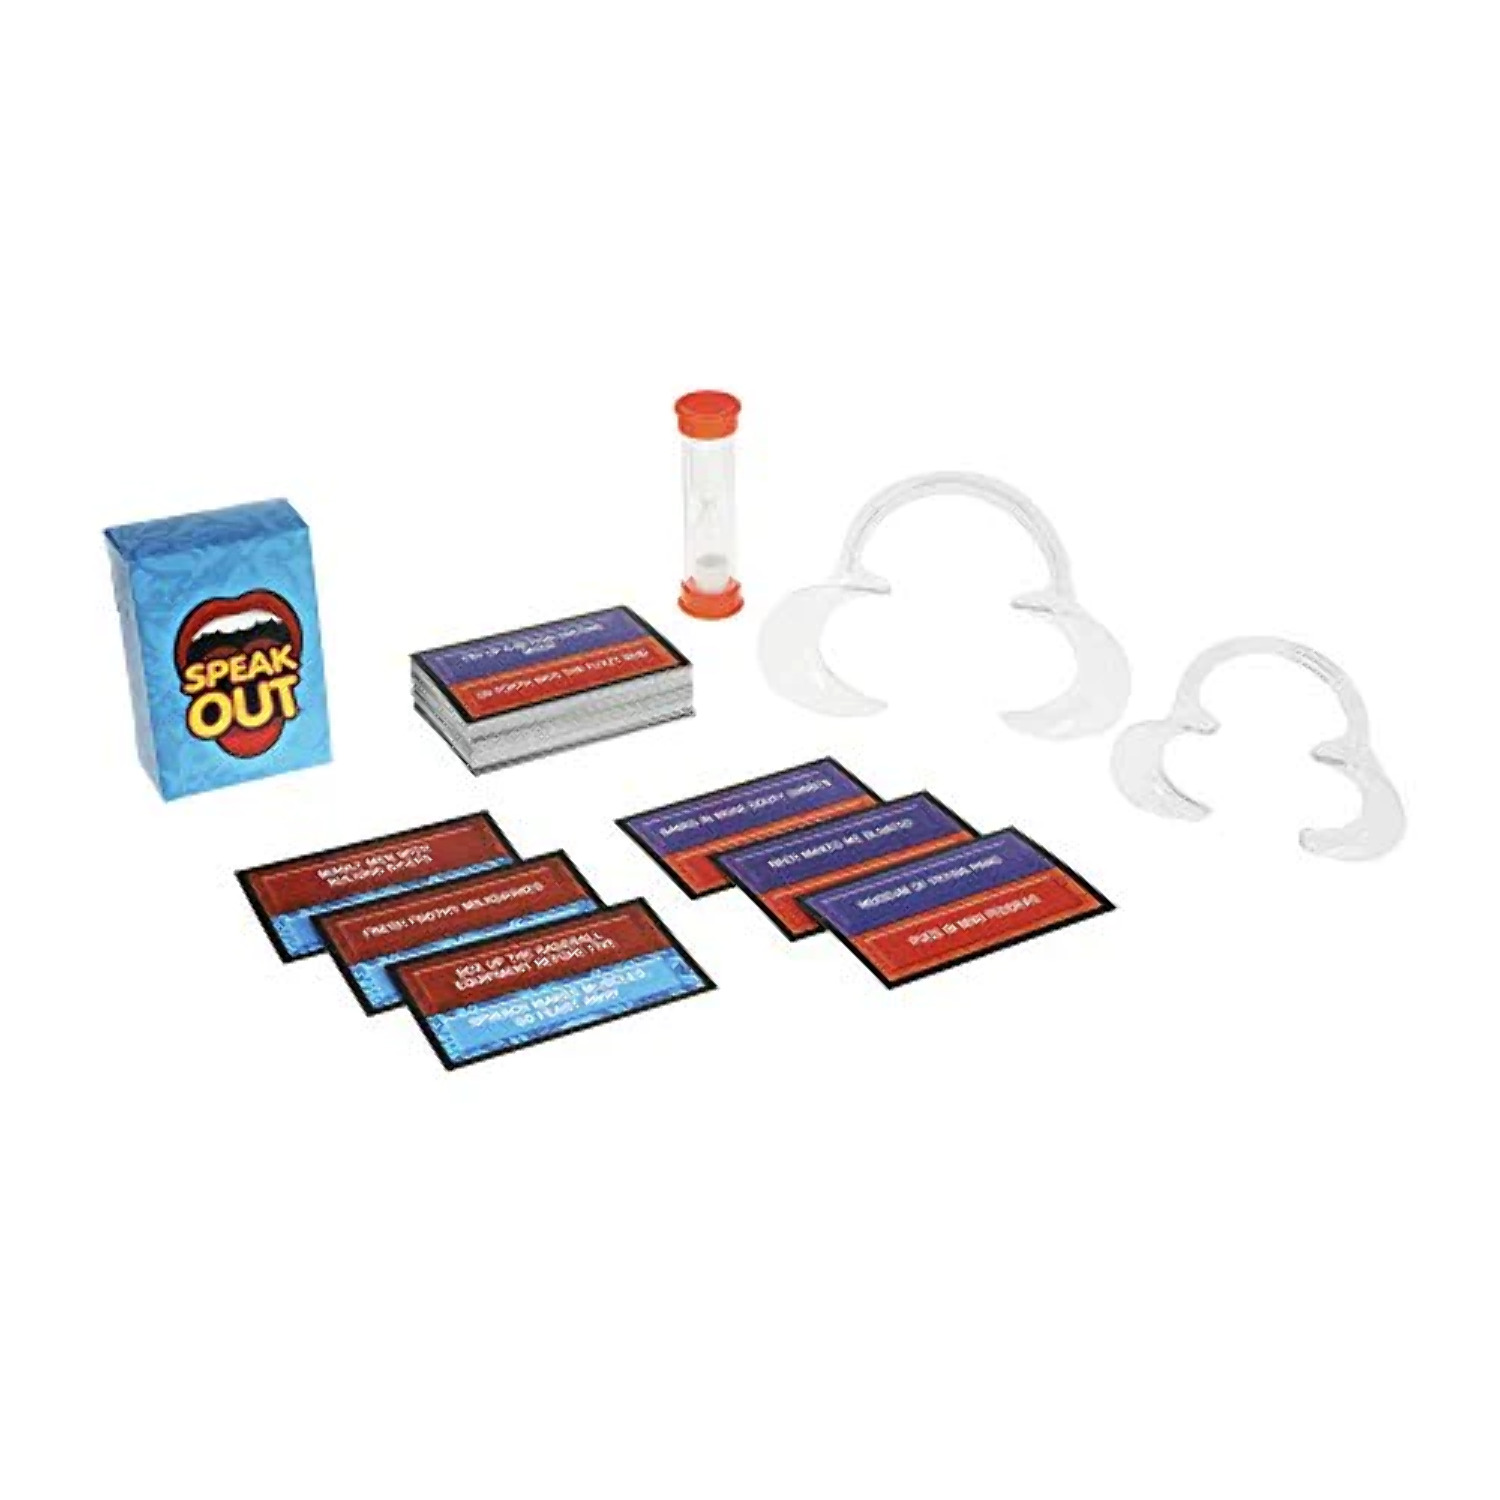 Speak Out Mouthpiece Challenge Board Game for Kids and Family Ages 8 and Up, 4+ Players - image 3 of 6